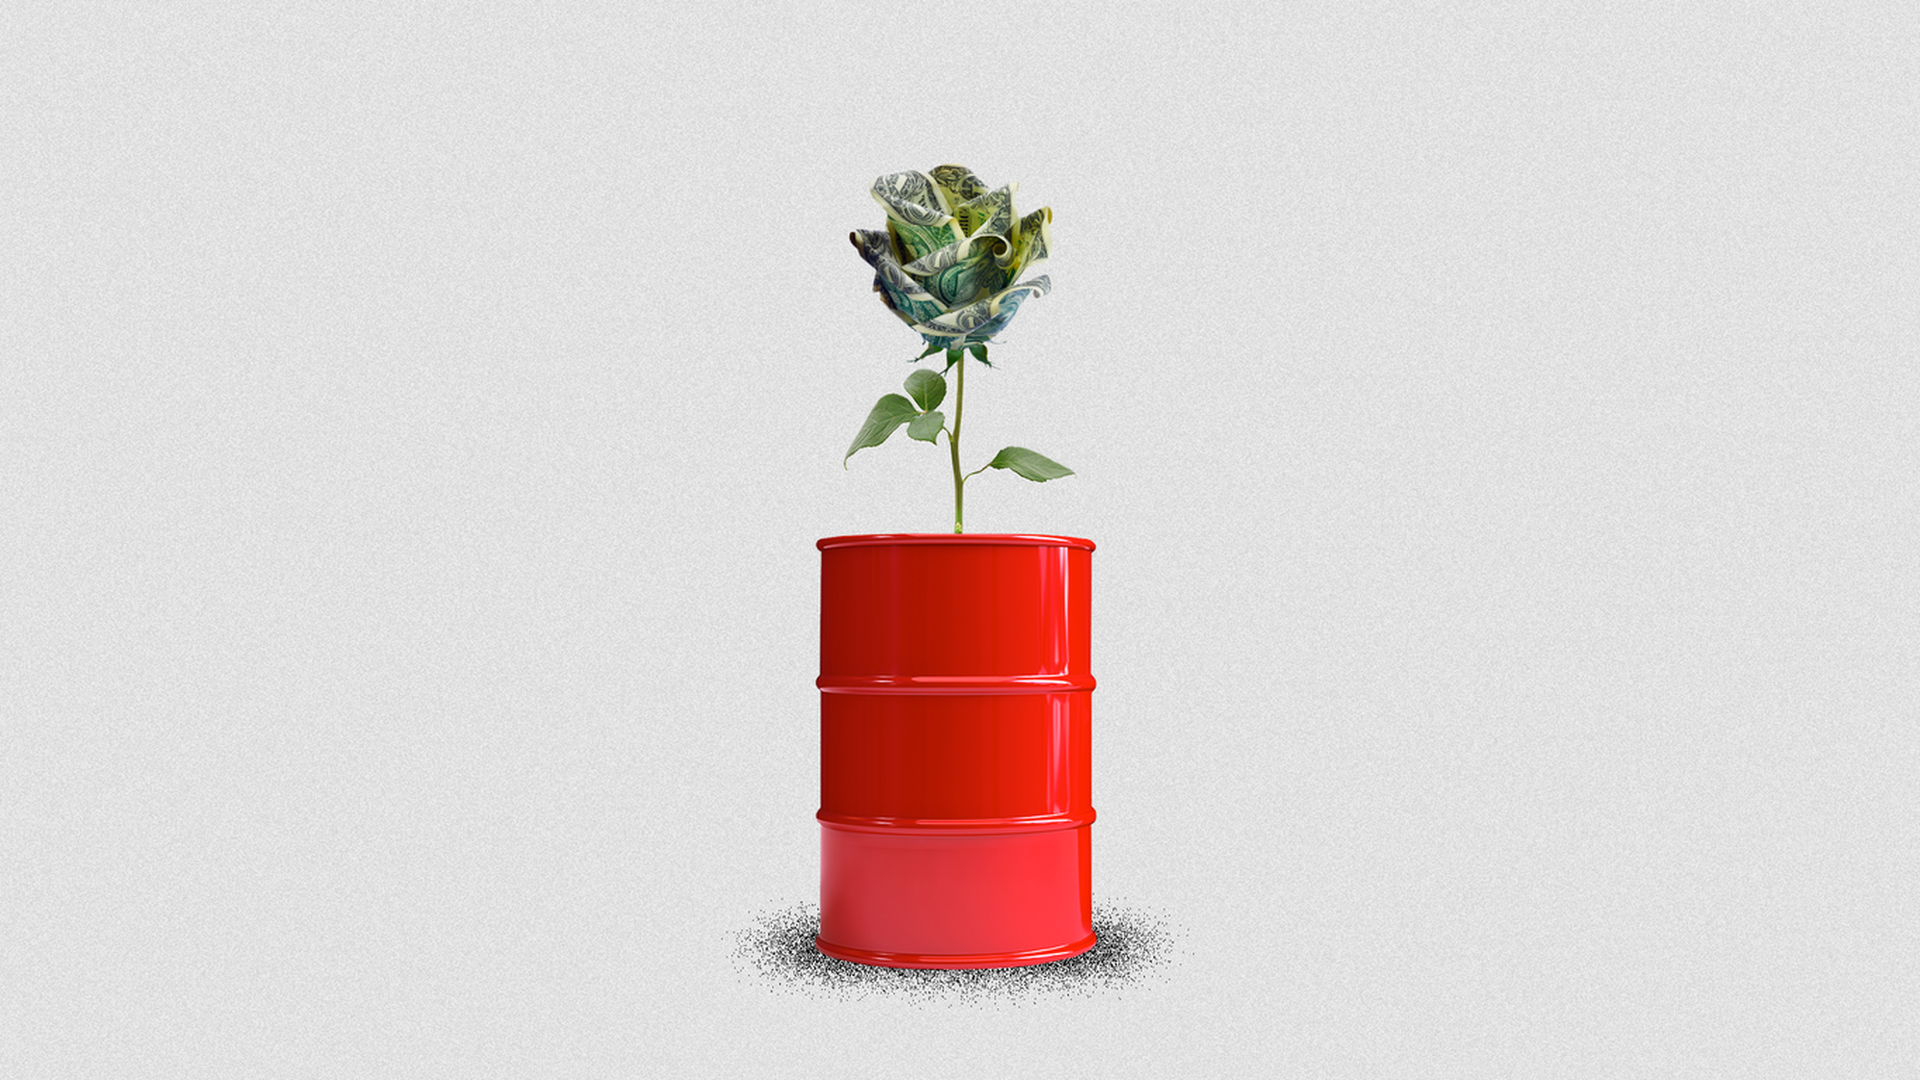 illustration of an oil barrel with a plant growing out of it